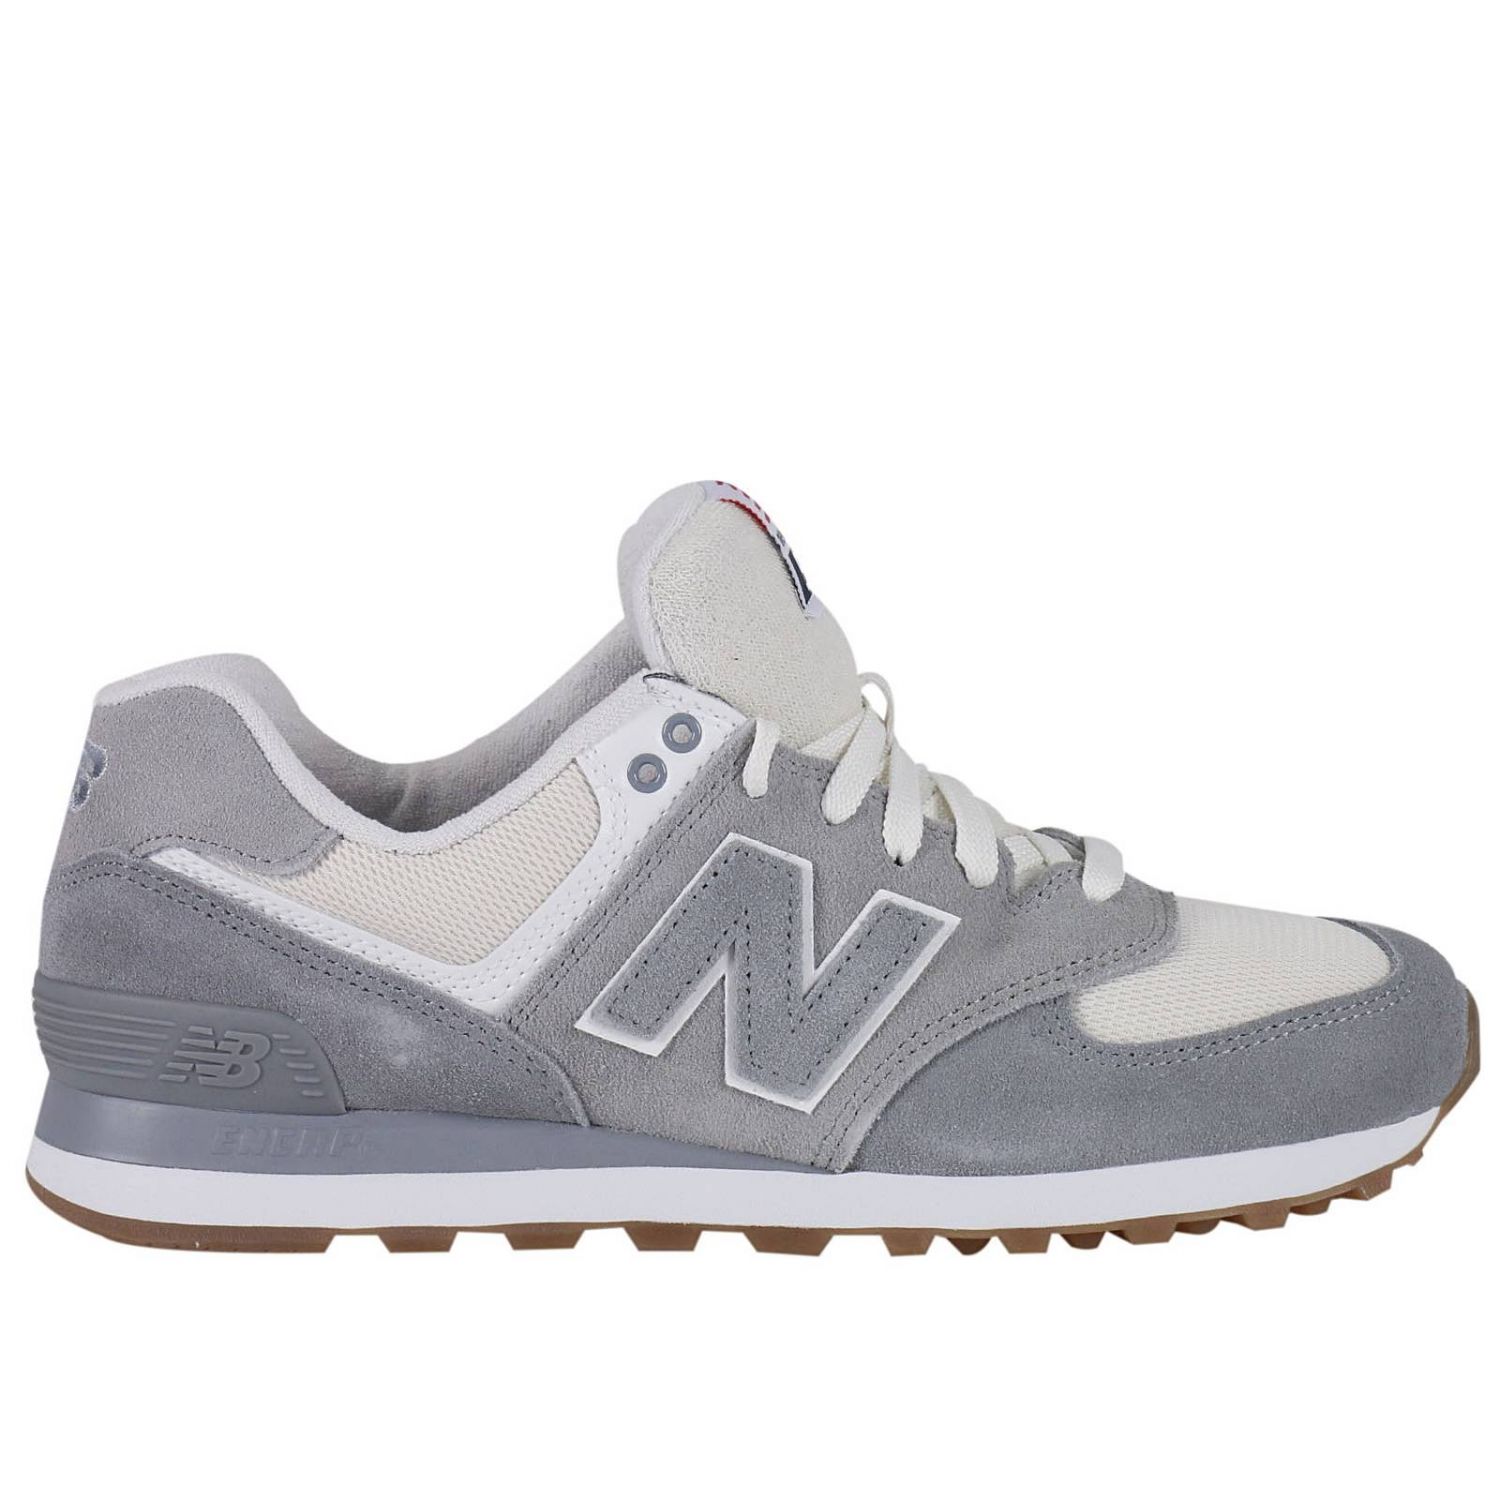 New Balance Outlet: Shoes men | Sneakers New Balance Men Grey ...